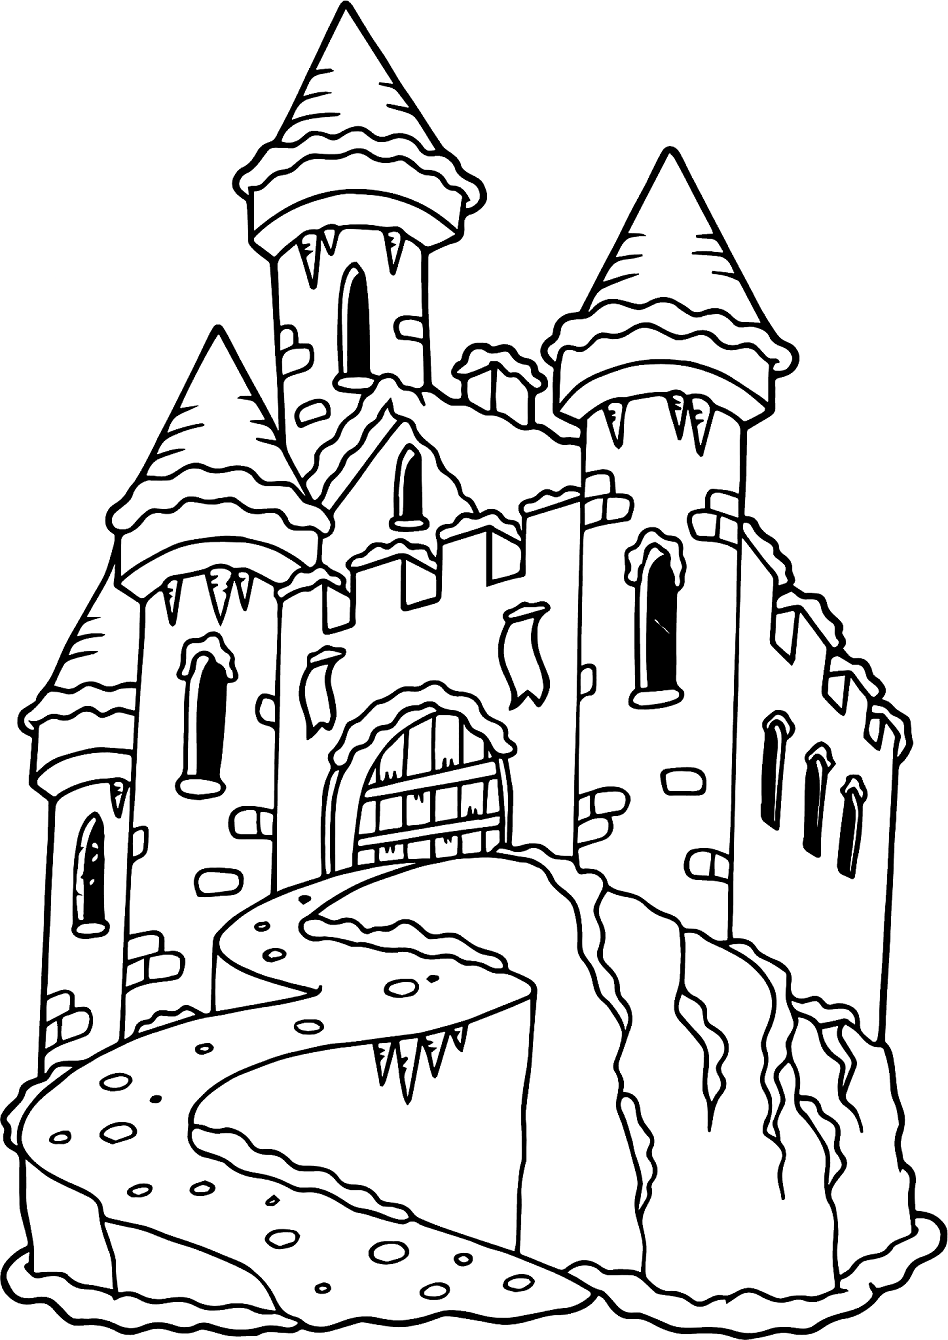 Ice Castle Coloring Page